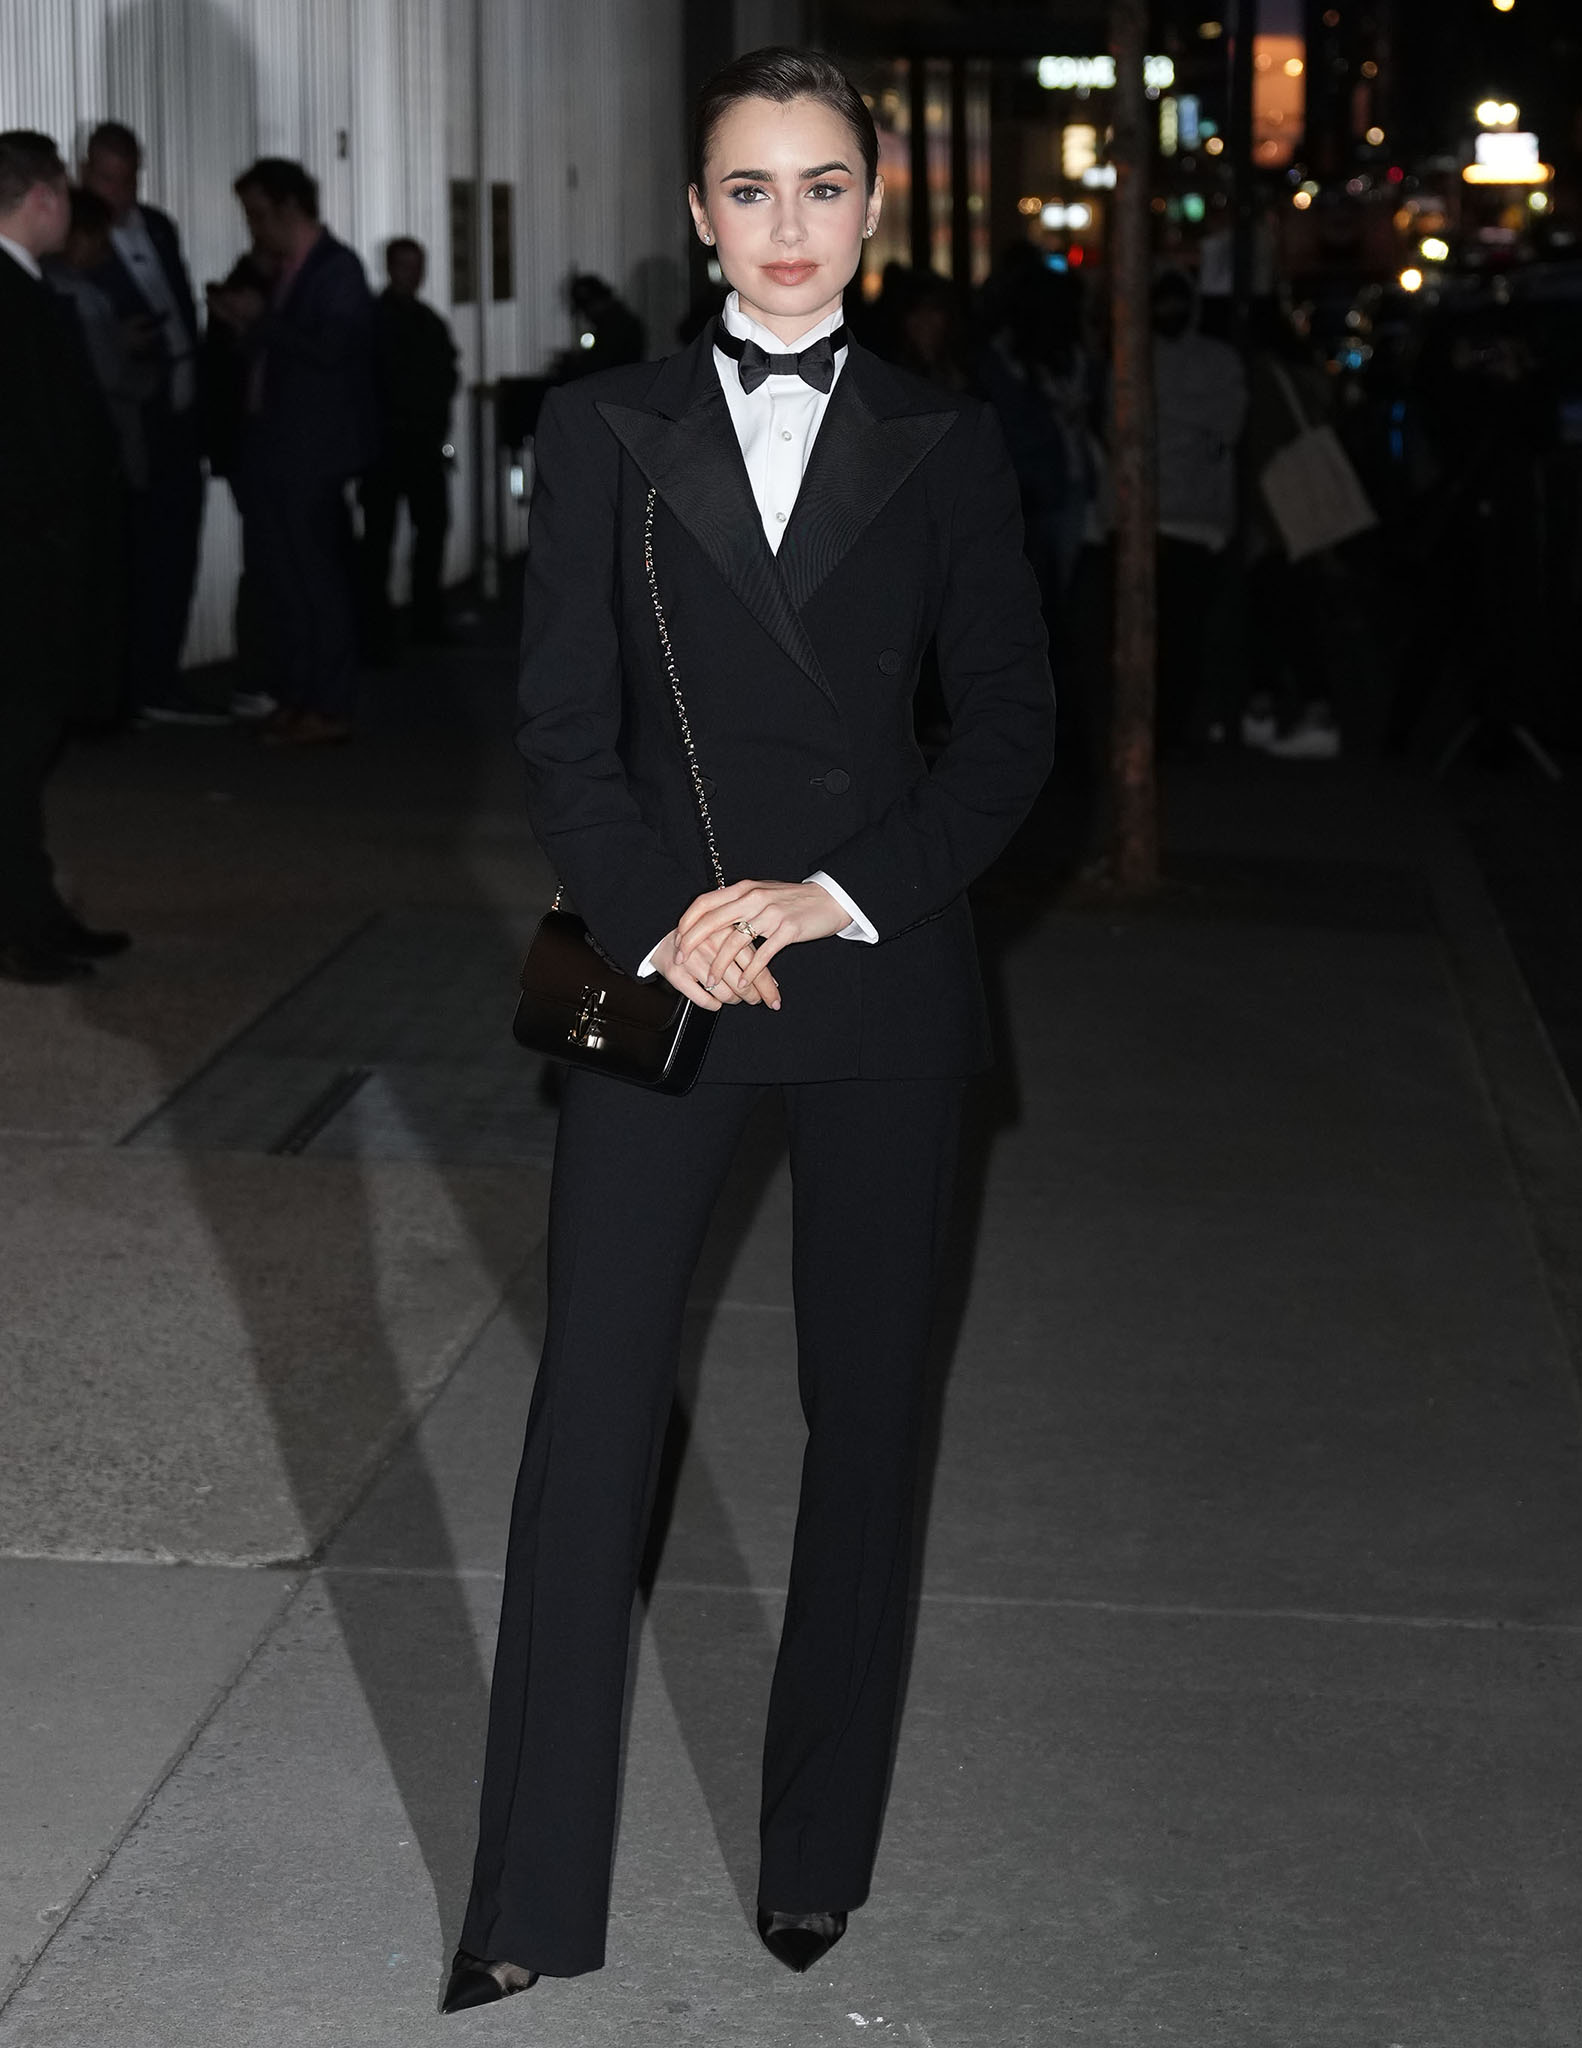 Lily Collins trades her feminine Emily in Paris ensembles for an androgynous tuxedo by Ralph Lauren